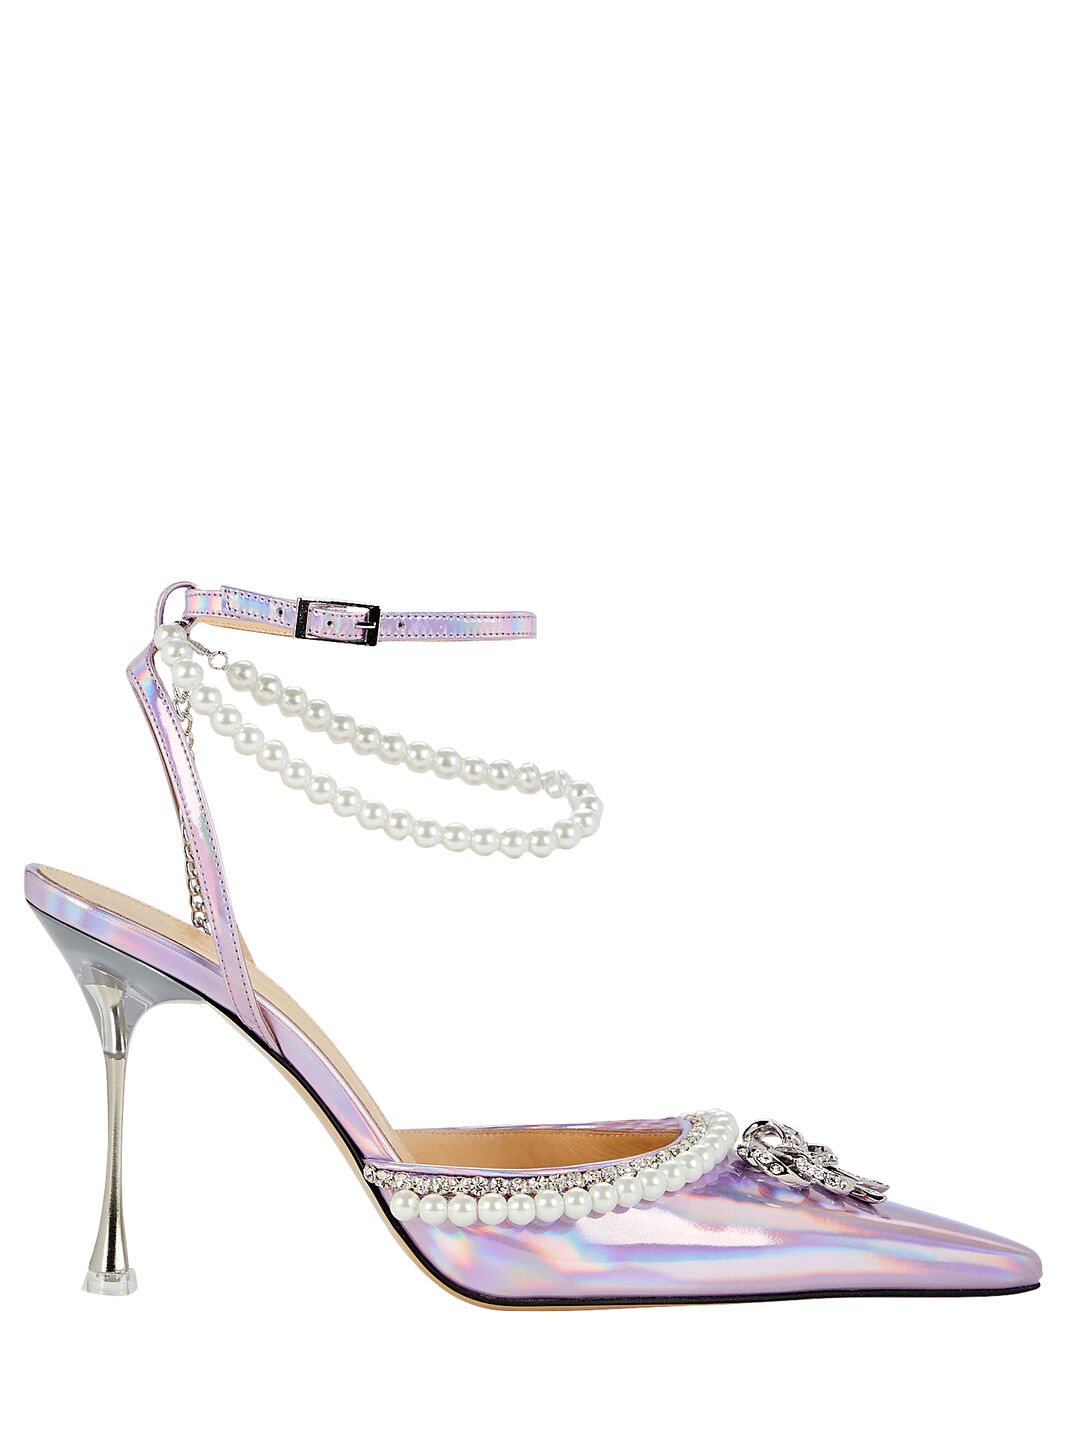 Double Bow Crystal-Embellished Pumps